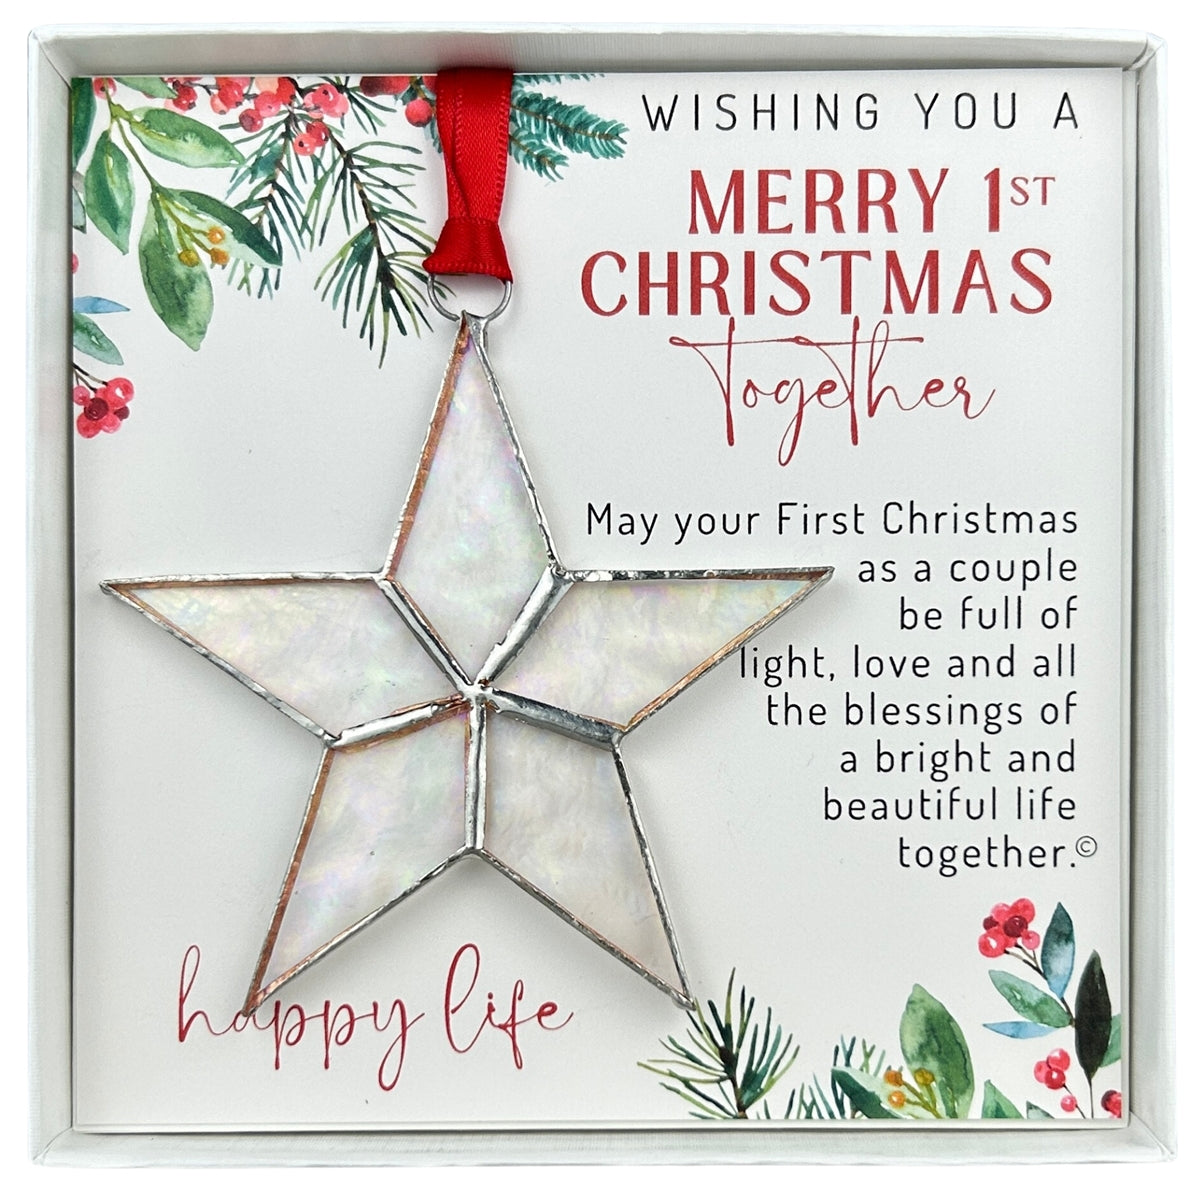 Handmade 4" clear iridescent stained glass star with silver edging, packaged with "First Christmas Together" sentiment in white gift box with clear lid.